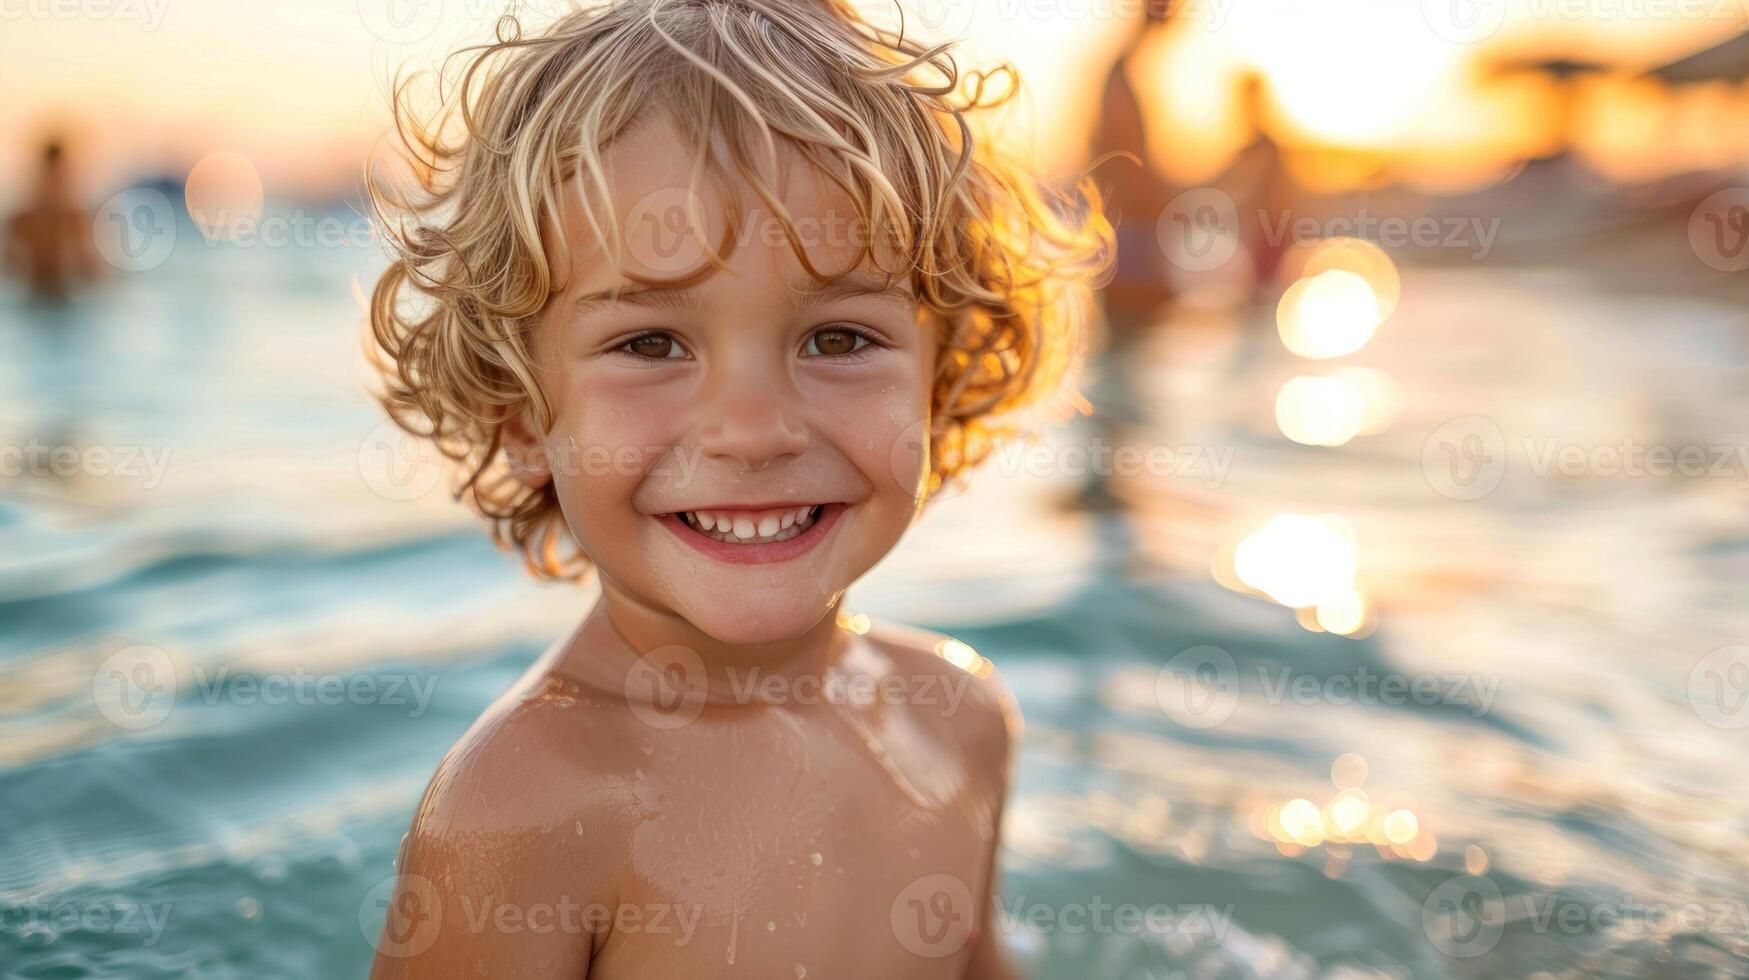 A little boy stands in shallow water photo